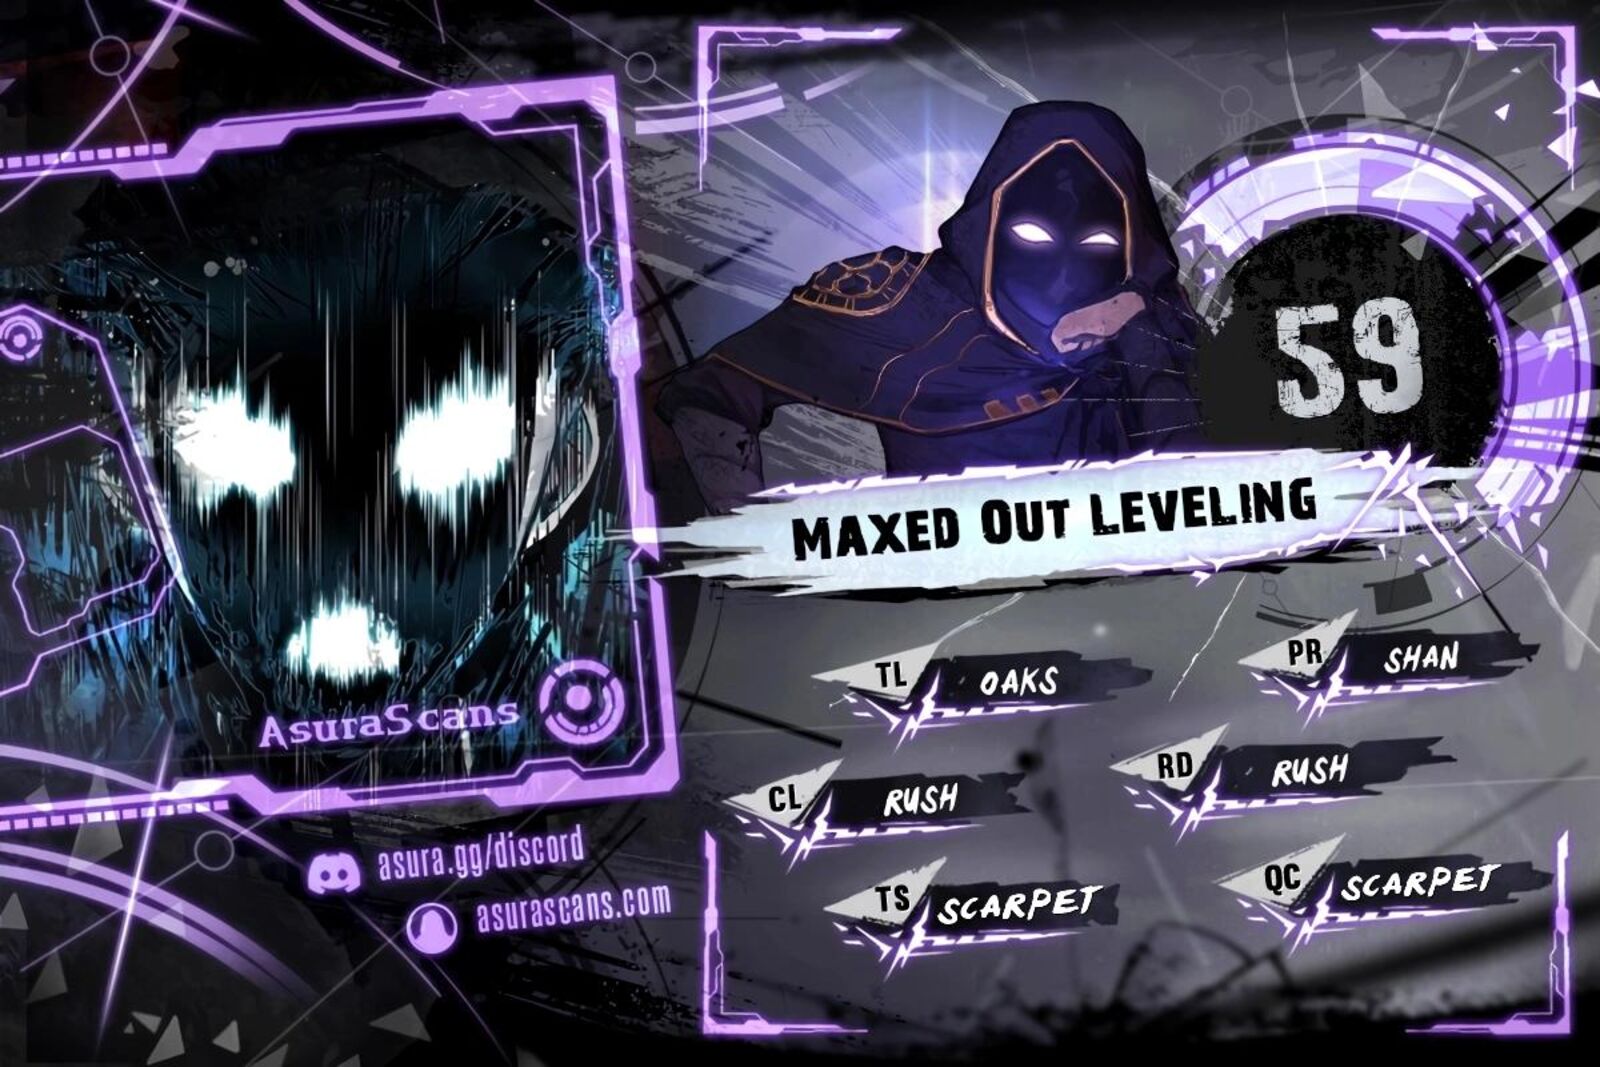 Maxed Out Leveling 59 1